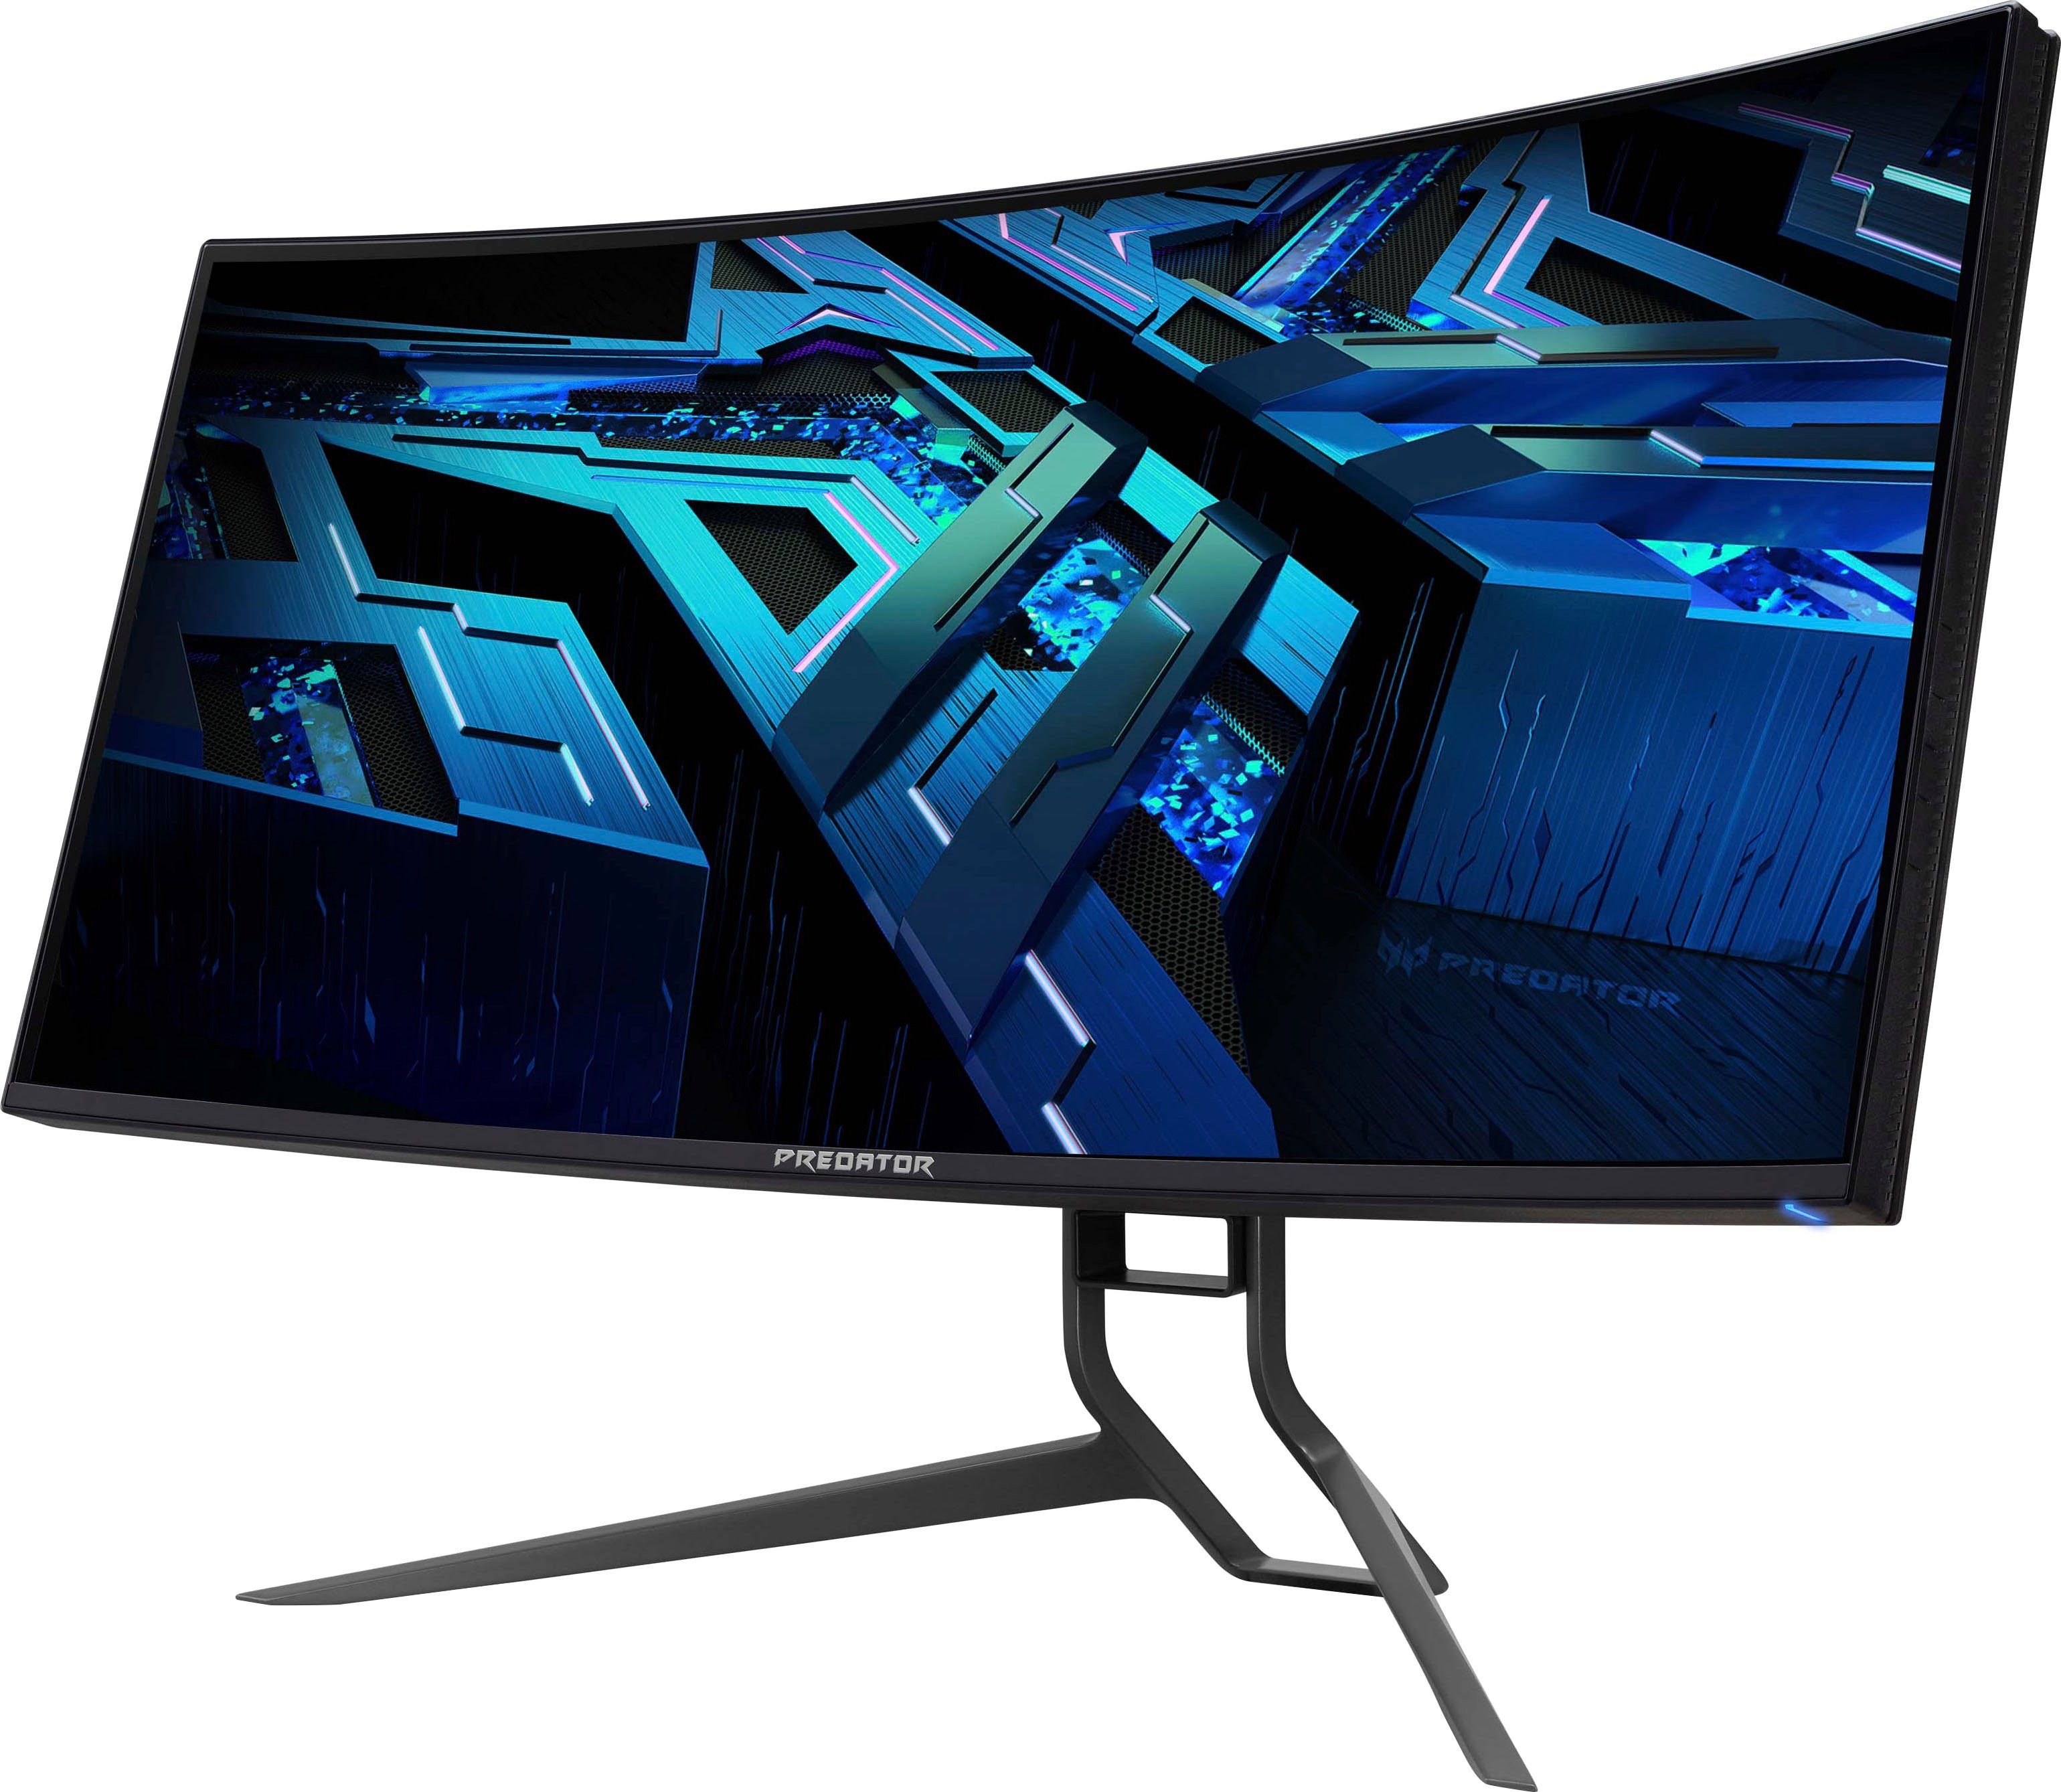 Acer Predator 3440 180 IPS-LED) Curved-Gaming-LED-Monitor ms (86,4 0,5 px, x cm/34 Hz, ", 1440 Reaktionszeit, X34GS